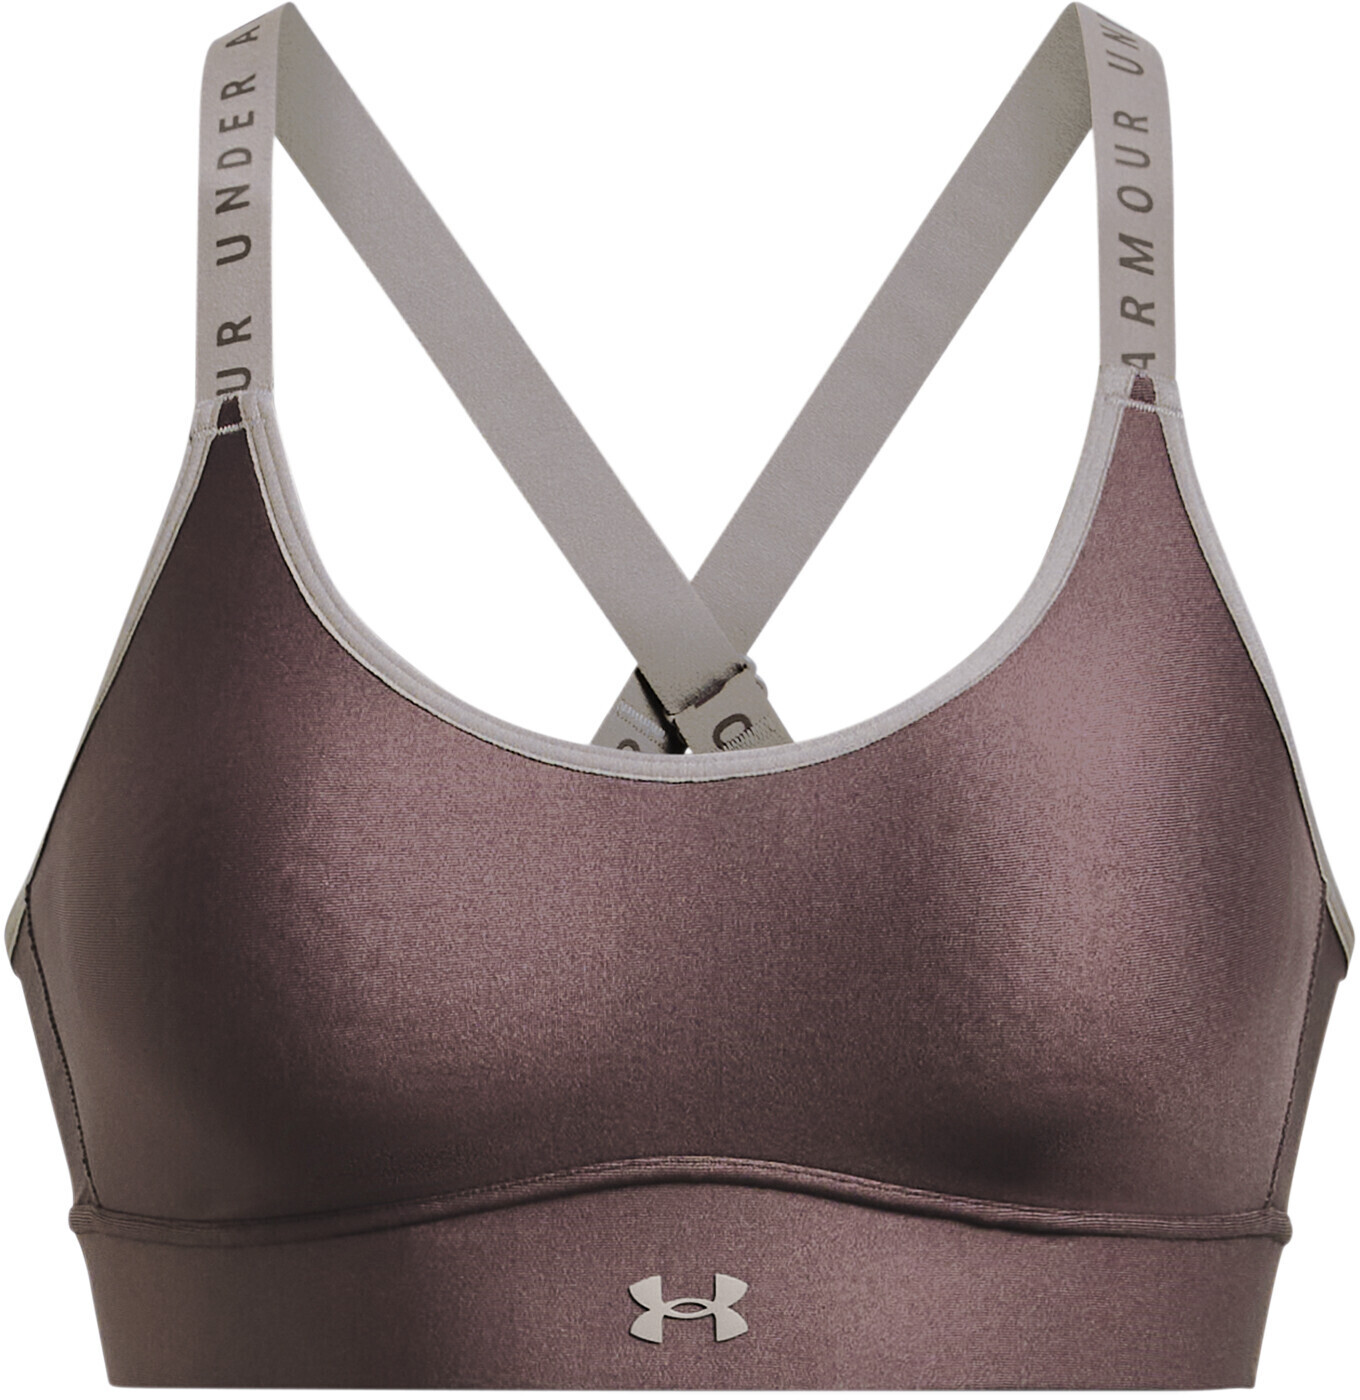 Under Armour Women's Under Armour Infinity Mid Covered Sports Bra White /  White / Halo Gray S